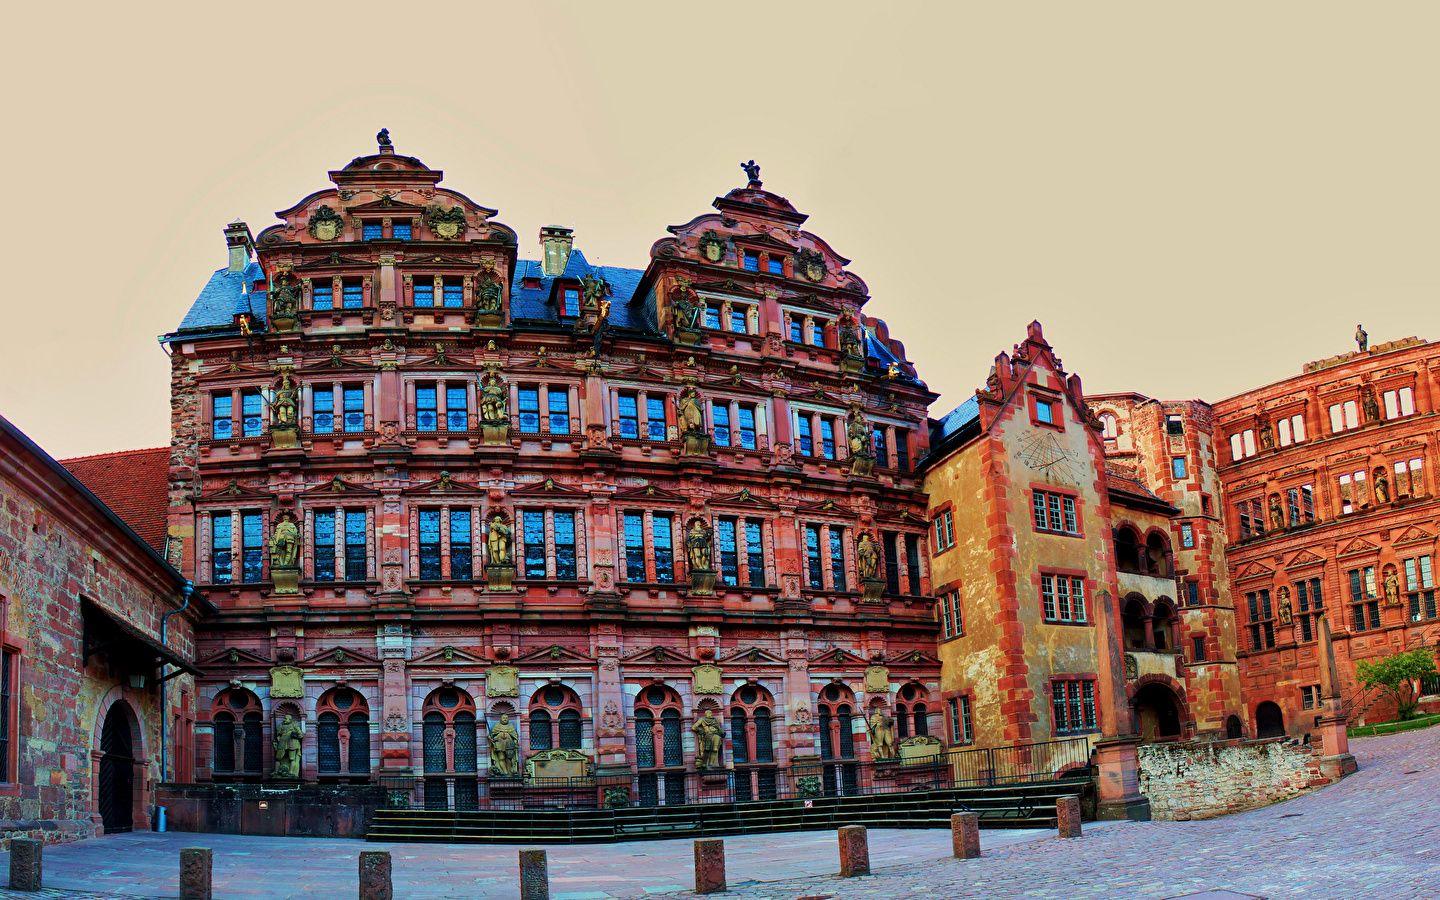 Heidelberg Castle Wallpapers and Backgrounds Wallpaper